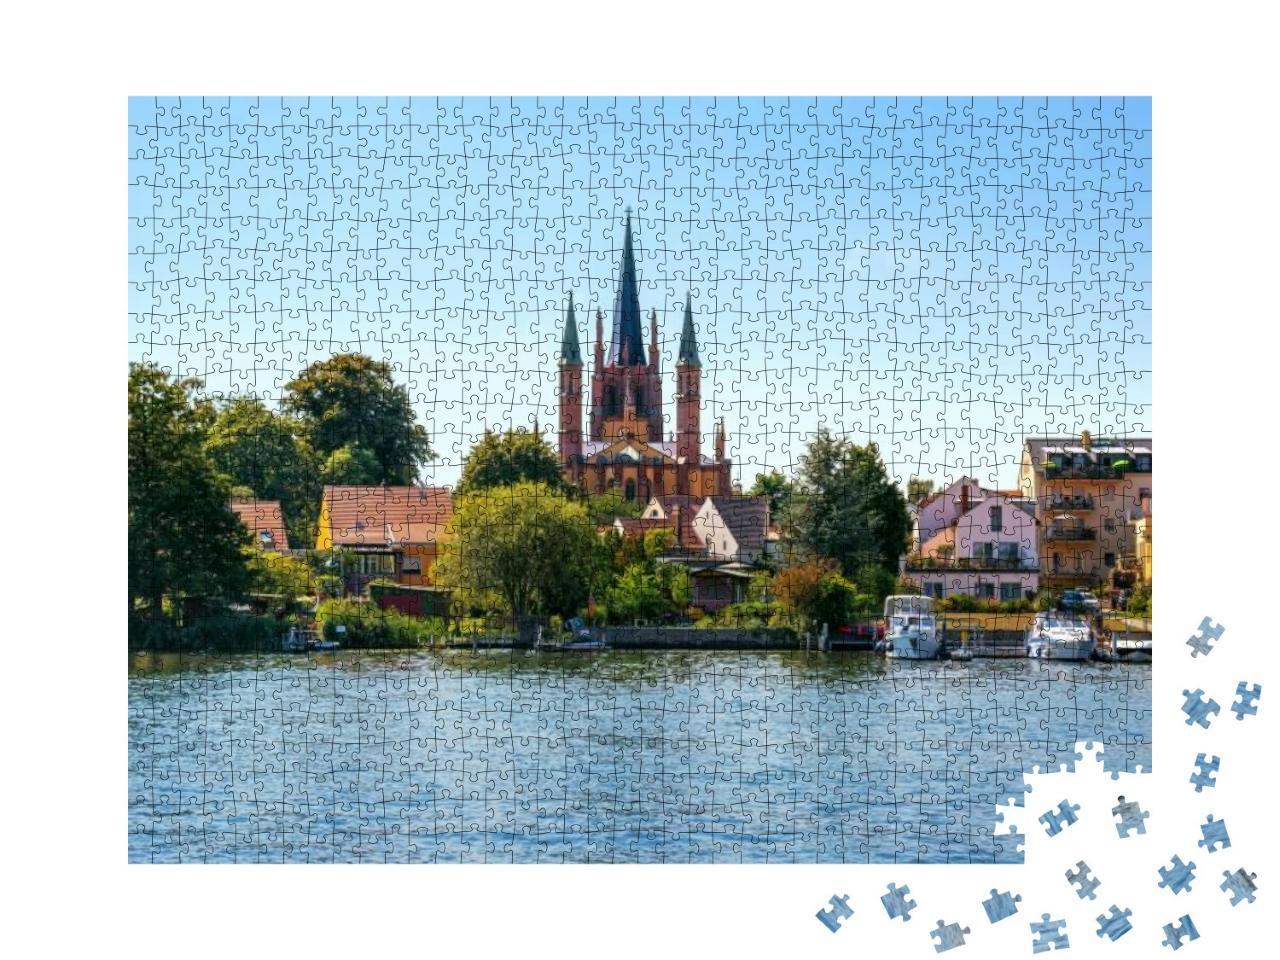 View of Werder on Havel in Brandenburg, Germany... Jigsaw Puzzle with 1000 pieces